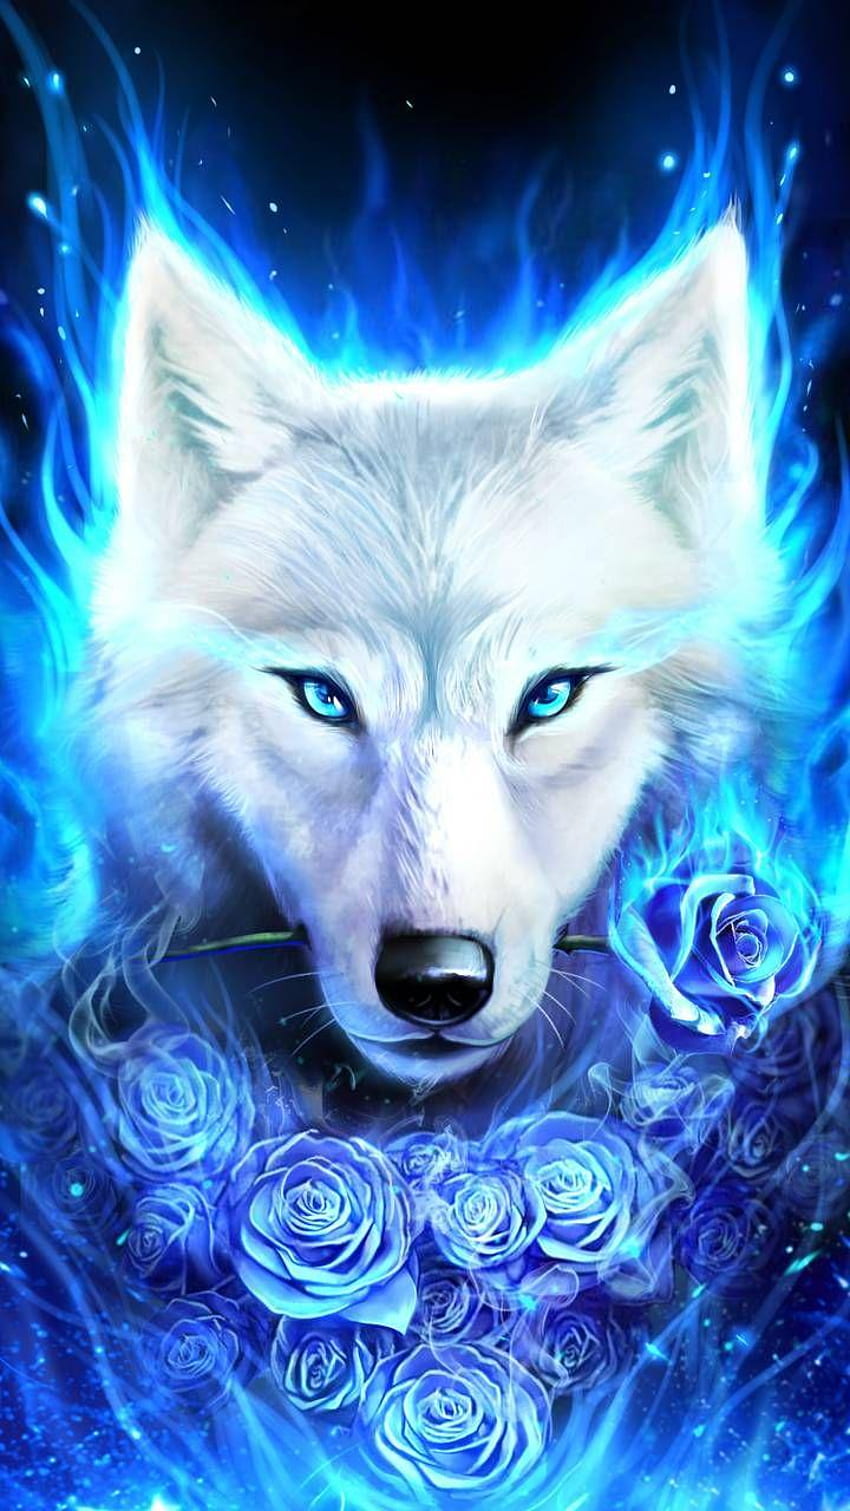 White Wolf Is Standing In The Snow On The Ground Background Pictures Of Anime  Wolves Background Image And Wallpaper for Free Download